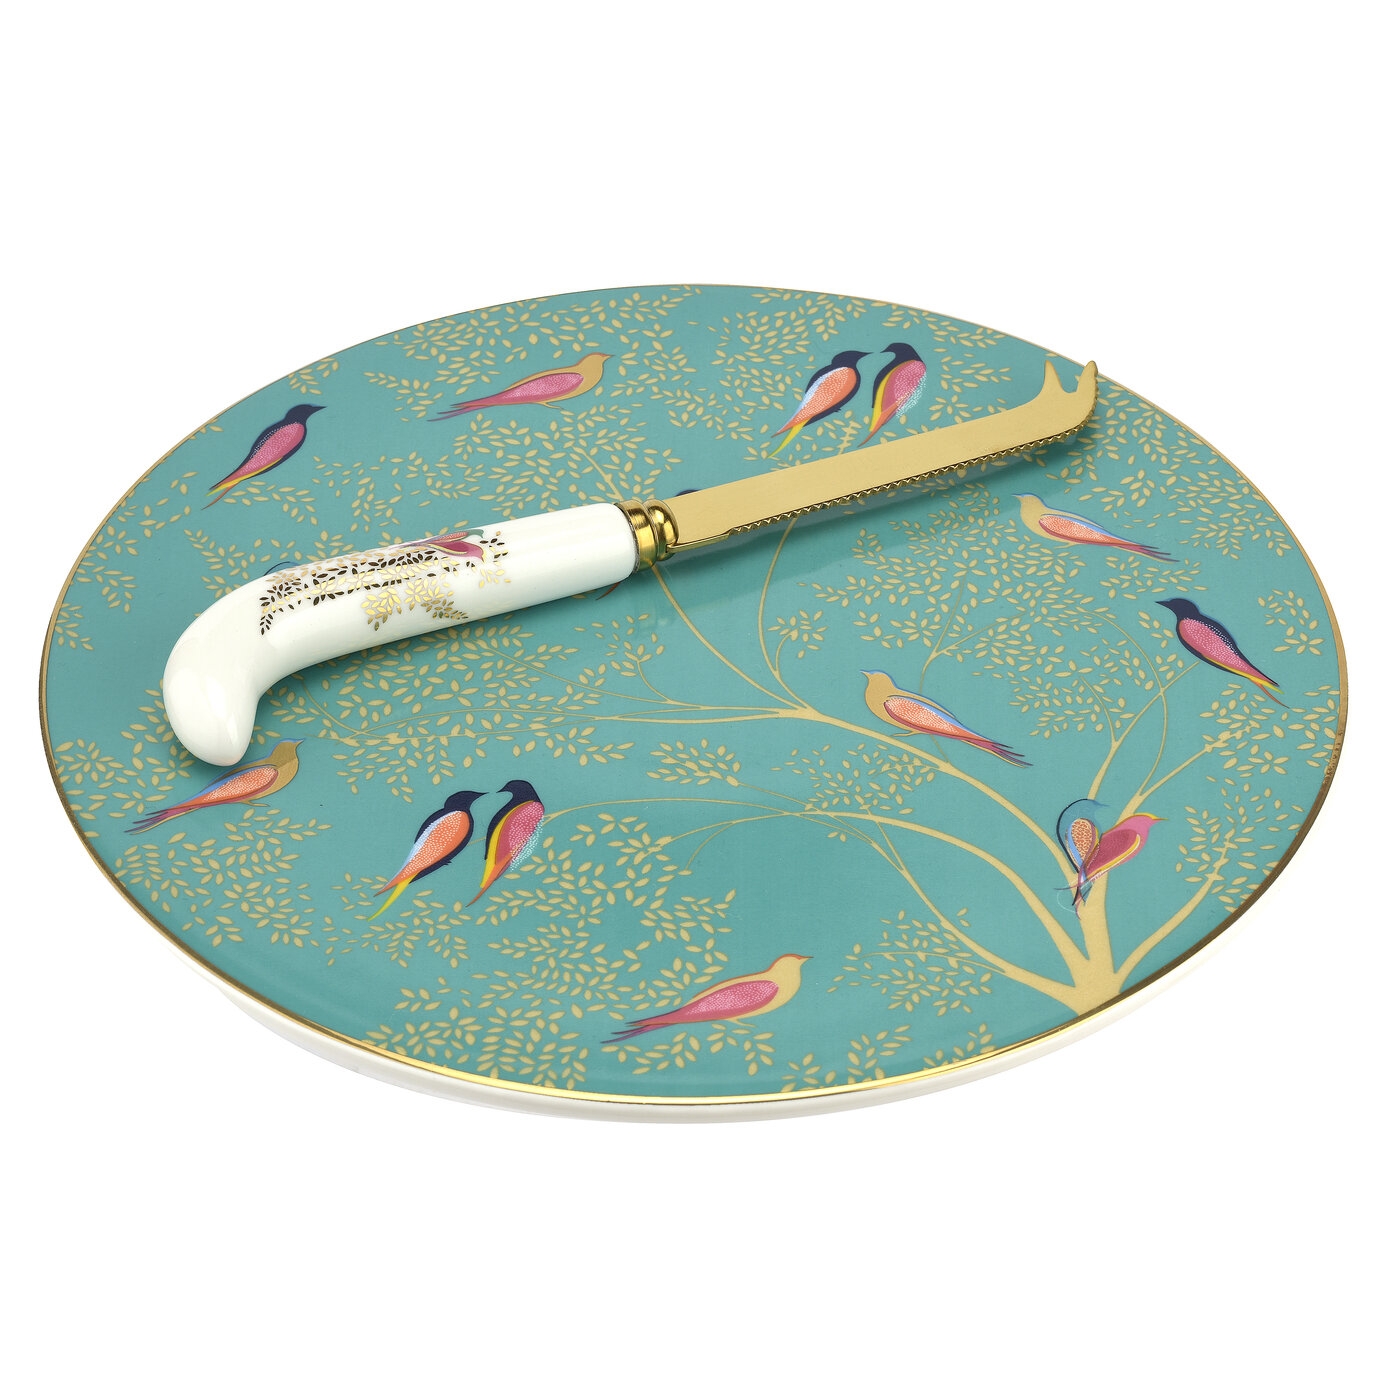 Sara Miller London For Portmeirion Chelsea Collection Cheese Plate With Knife Portmeirion